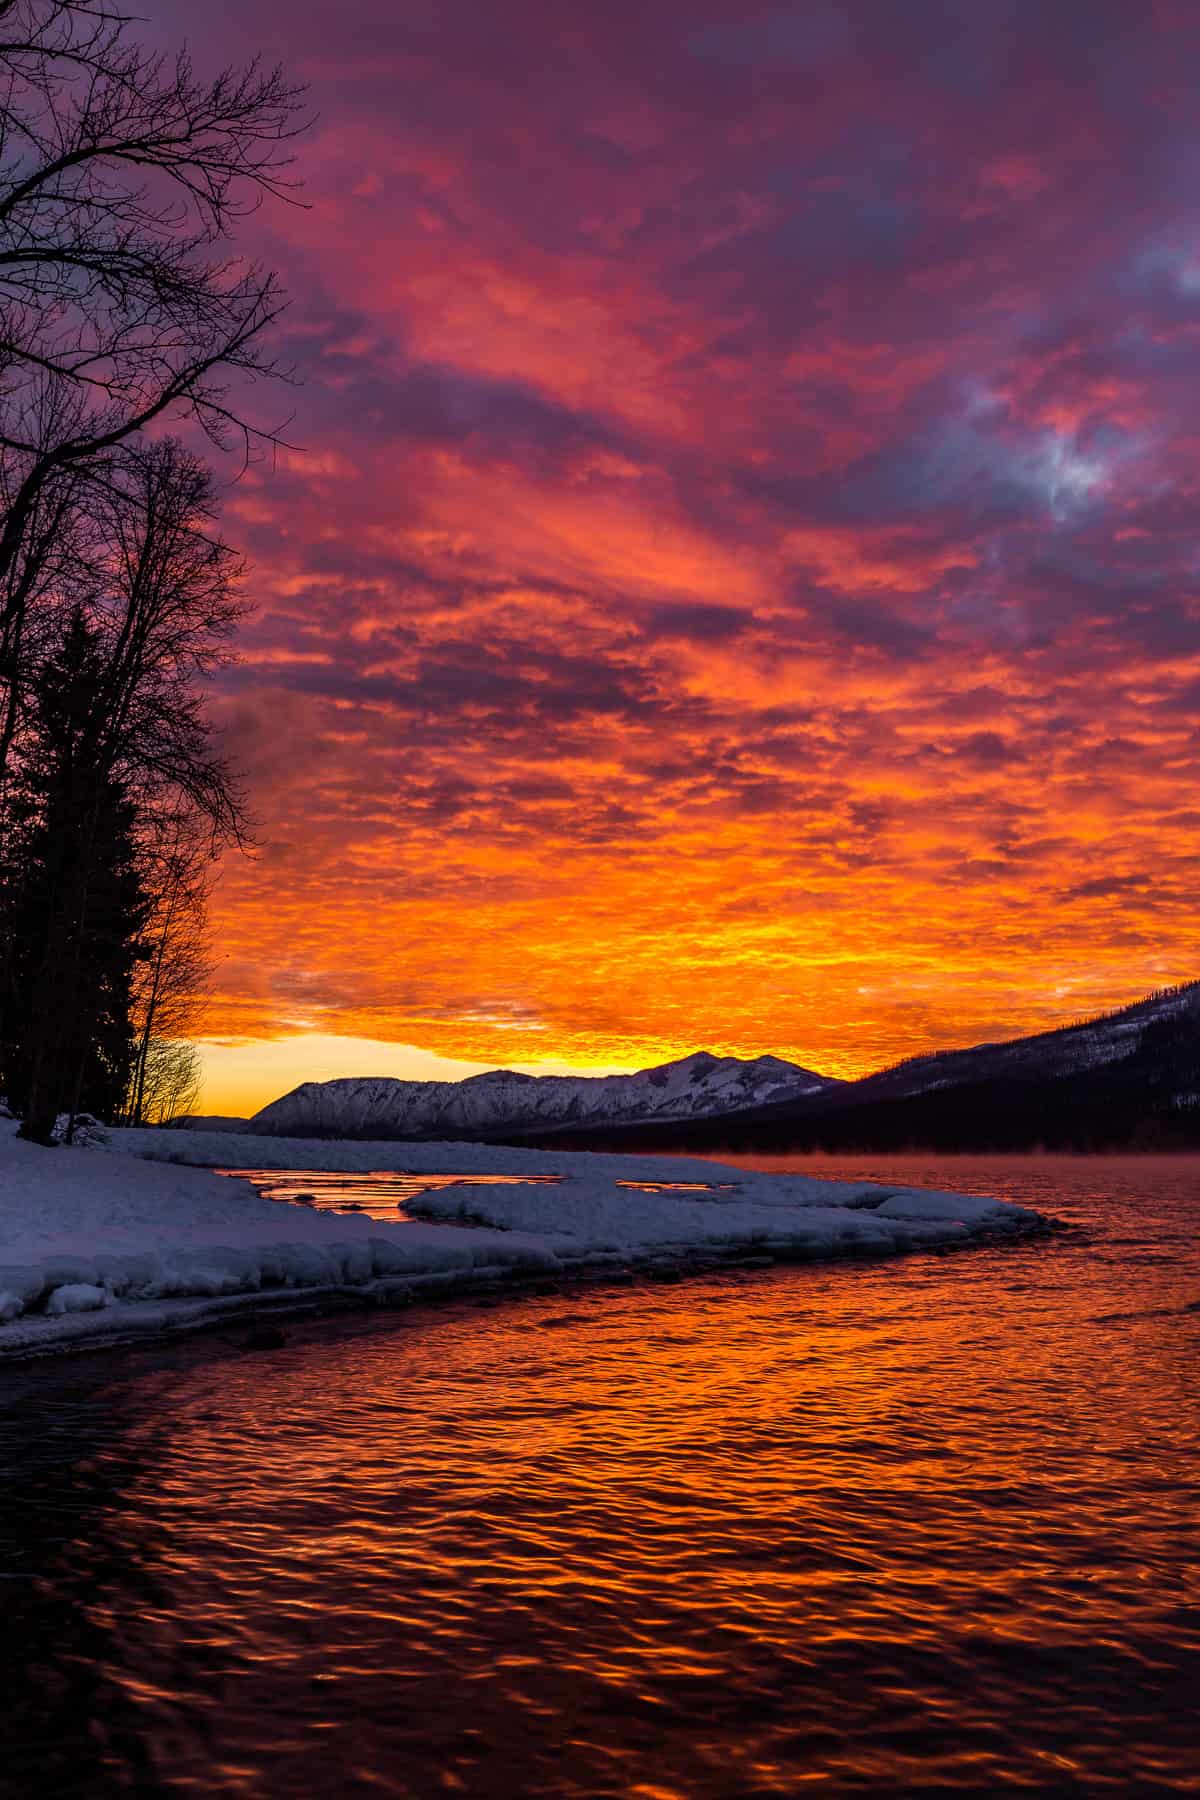 Fiery orange sunset with bright pink high in the sky with a snowy lake shoreline.